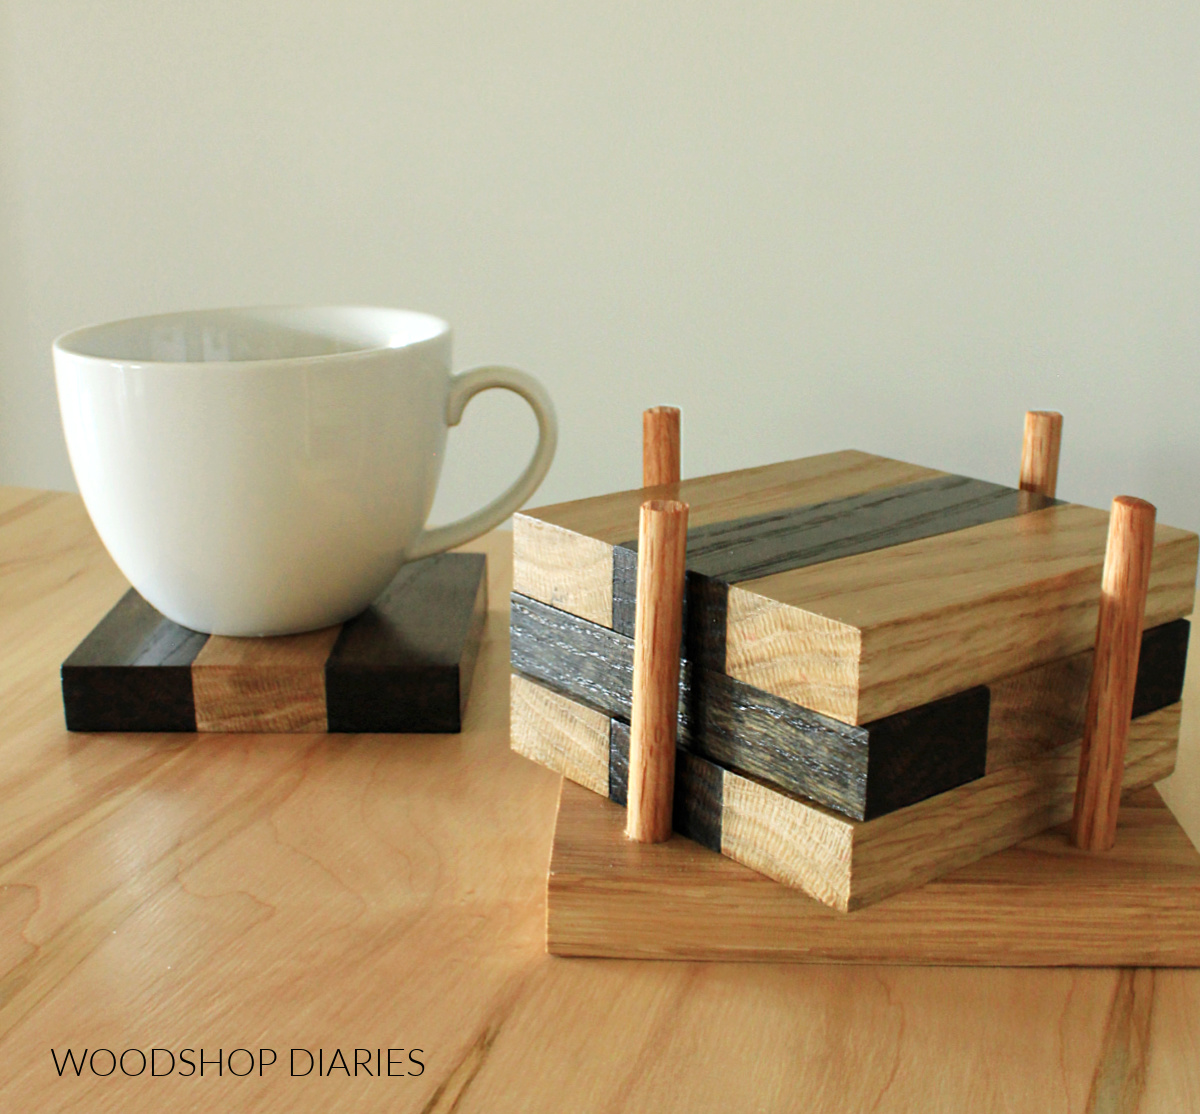 9 DIY Woodworking Gift Ideas (Easy and Budget Friendly) - Angela Marie Made